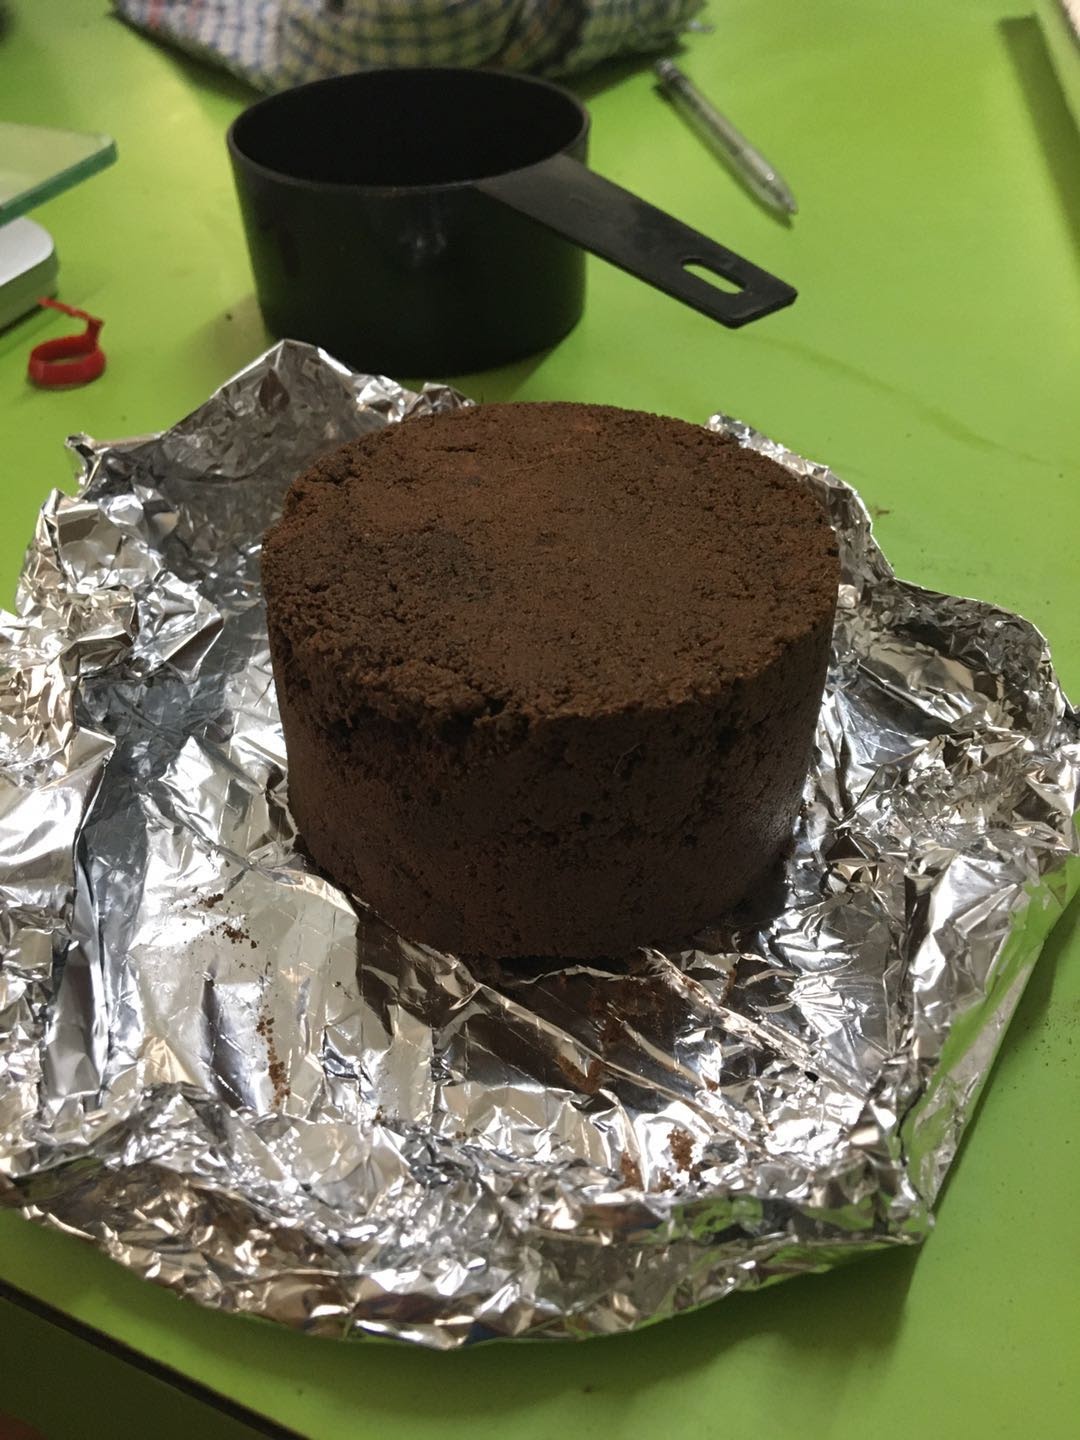 A soil sample (core) collected using a kitchen measuring cup.